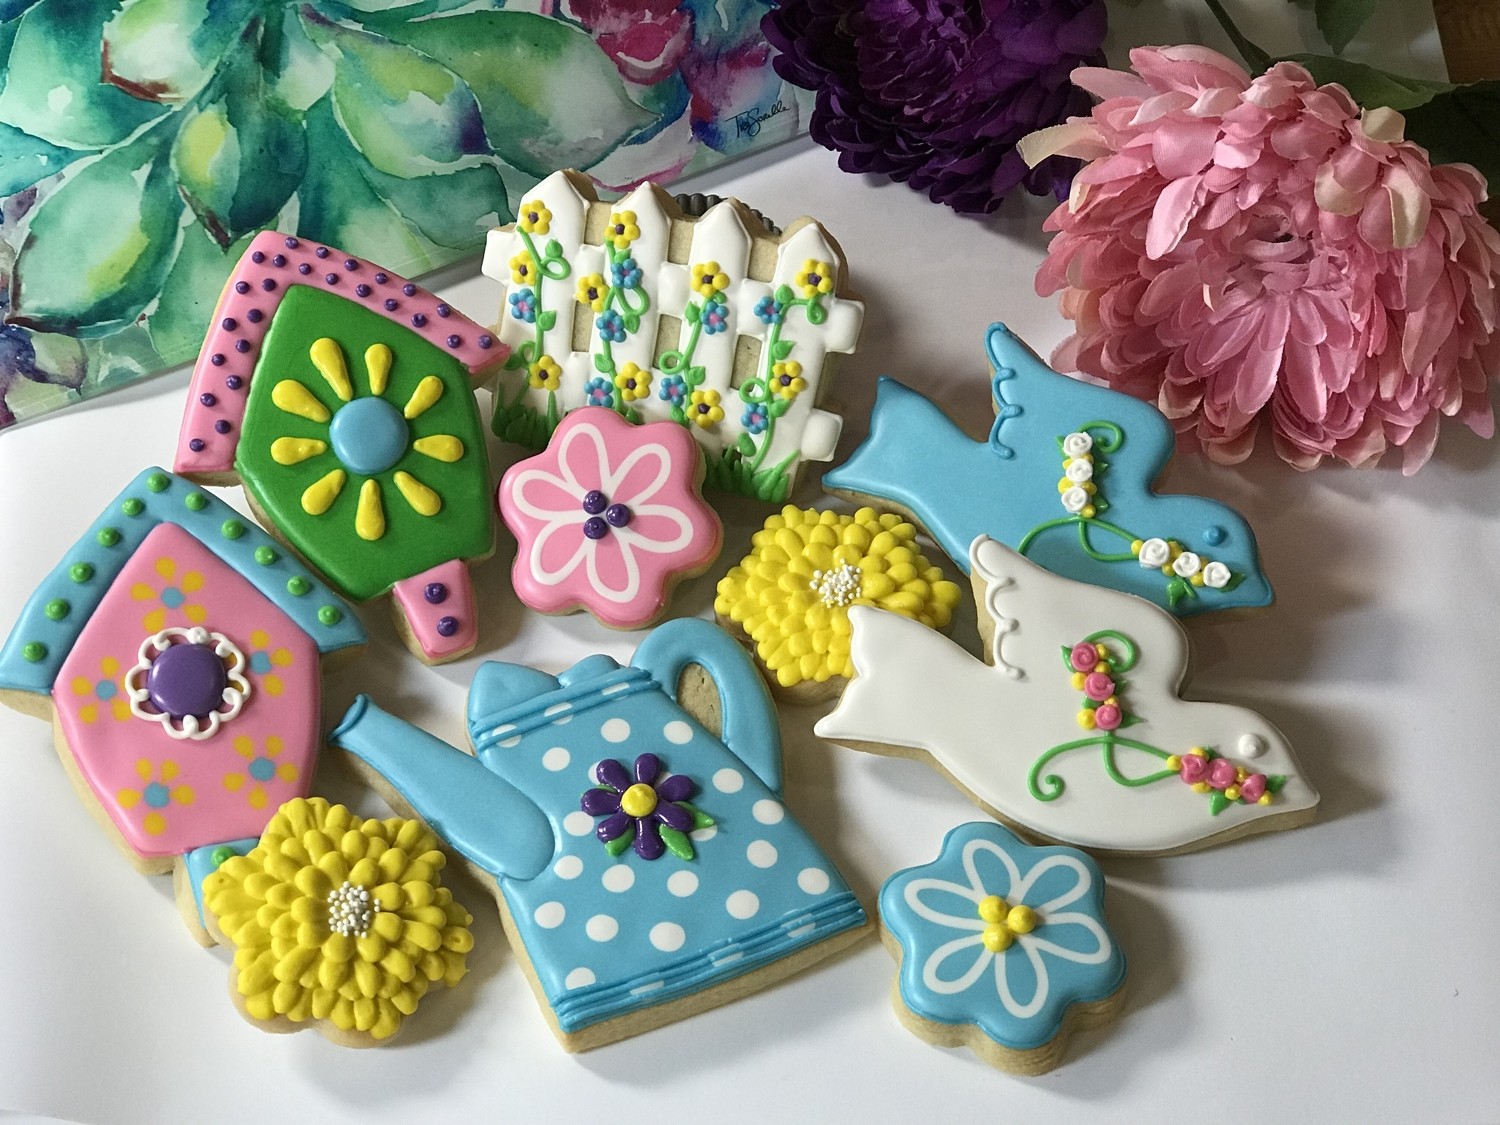 SPRING Decorating Workshop - SUNDAY, MAY 19, 2019 at 3:00 p.m. (THE POTPOURRI HOUSE) - CHILD TICKET (Age 6-12)